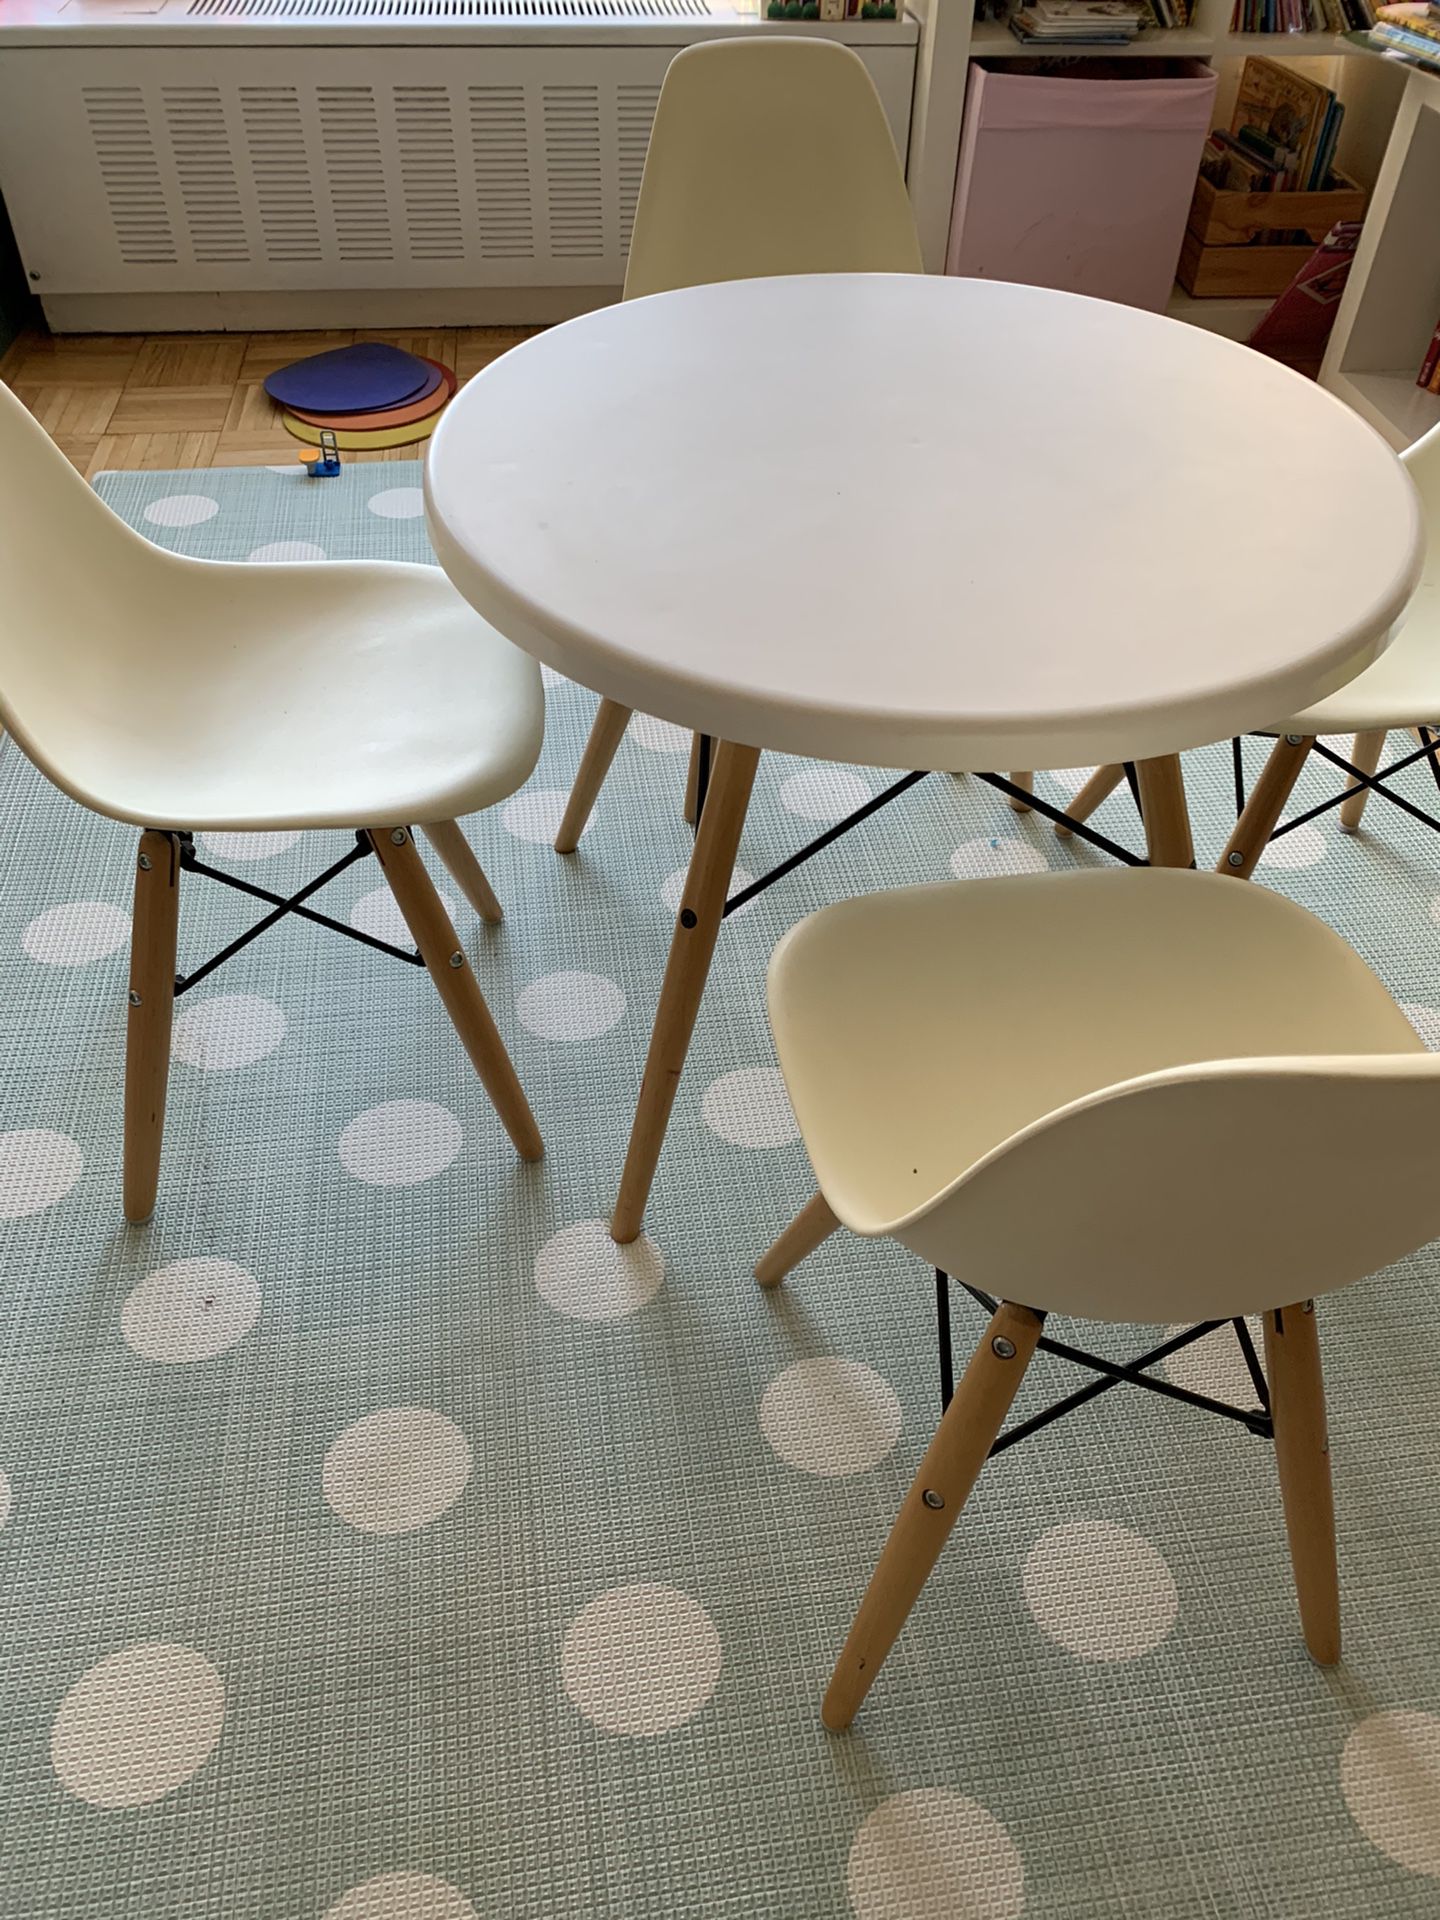 Table + 4 chairs kids eames style